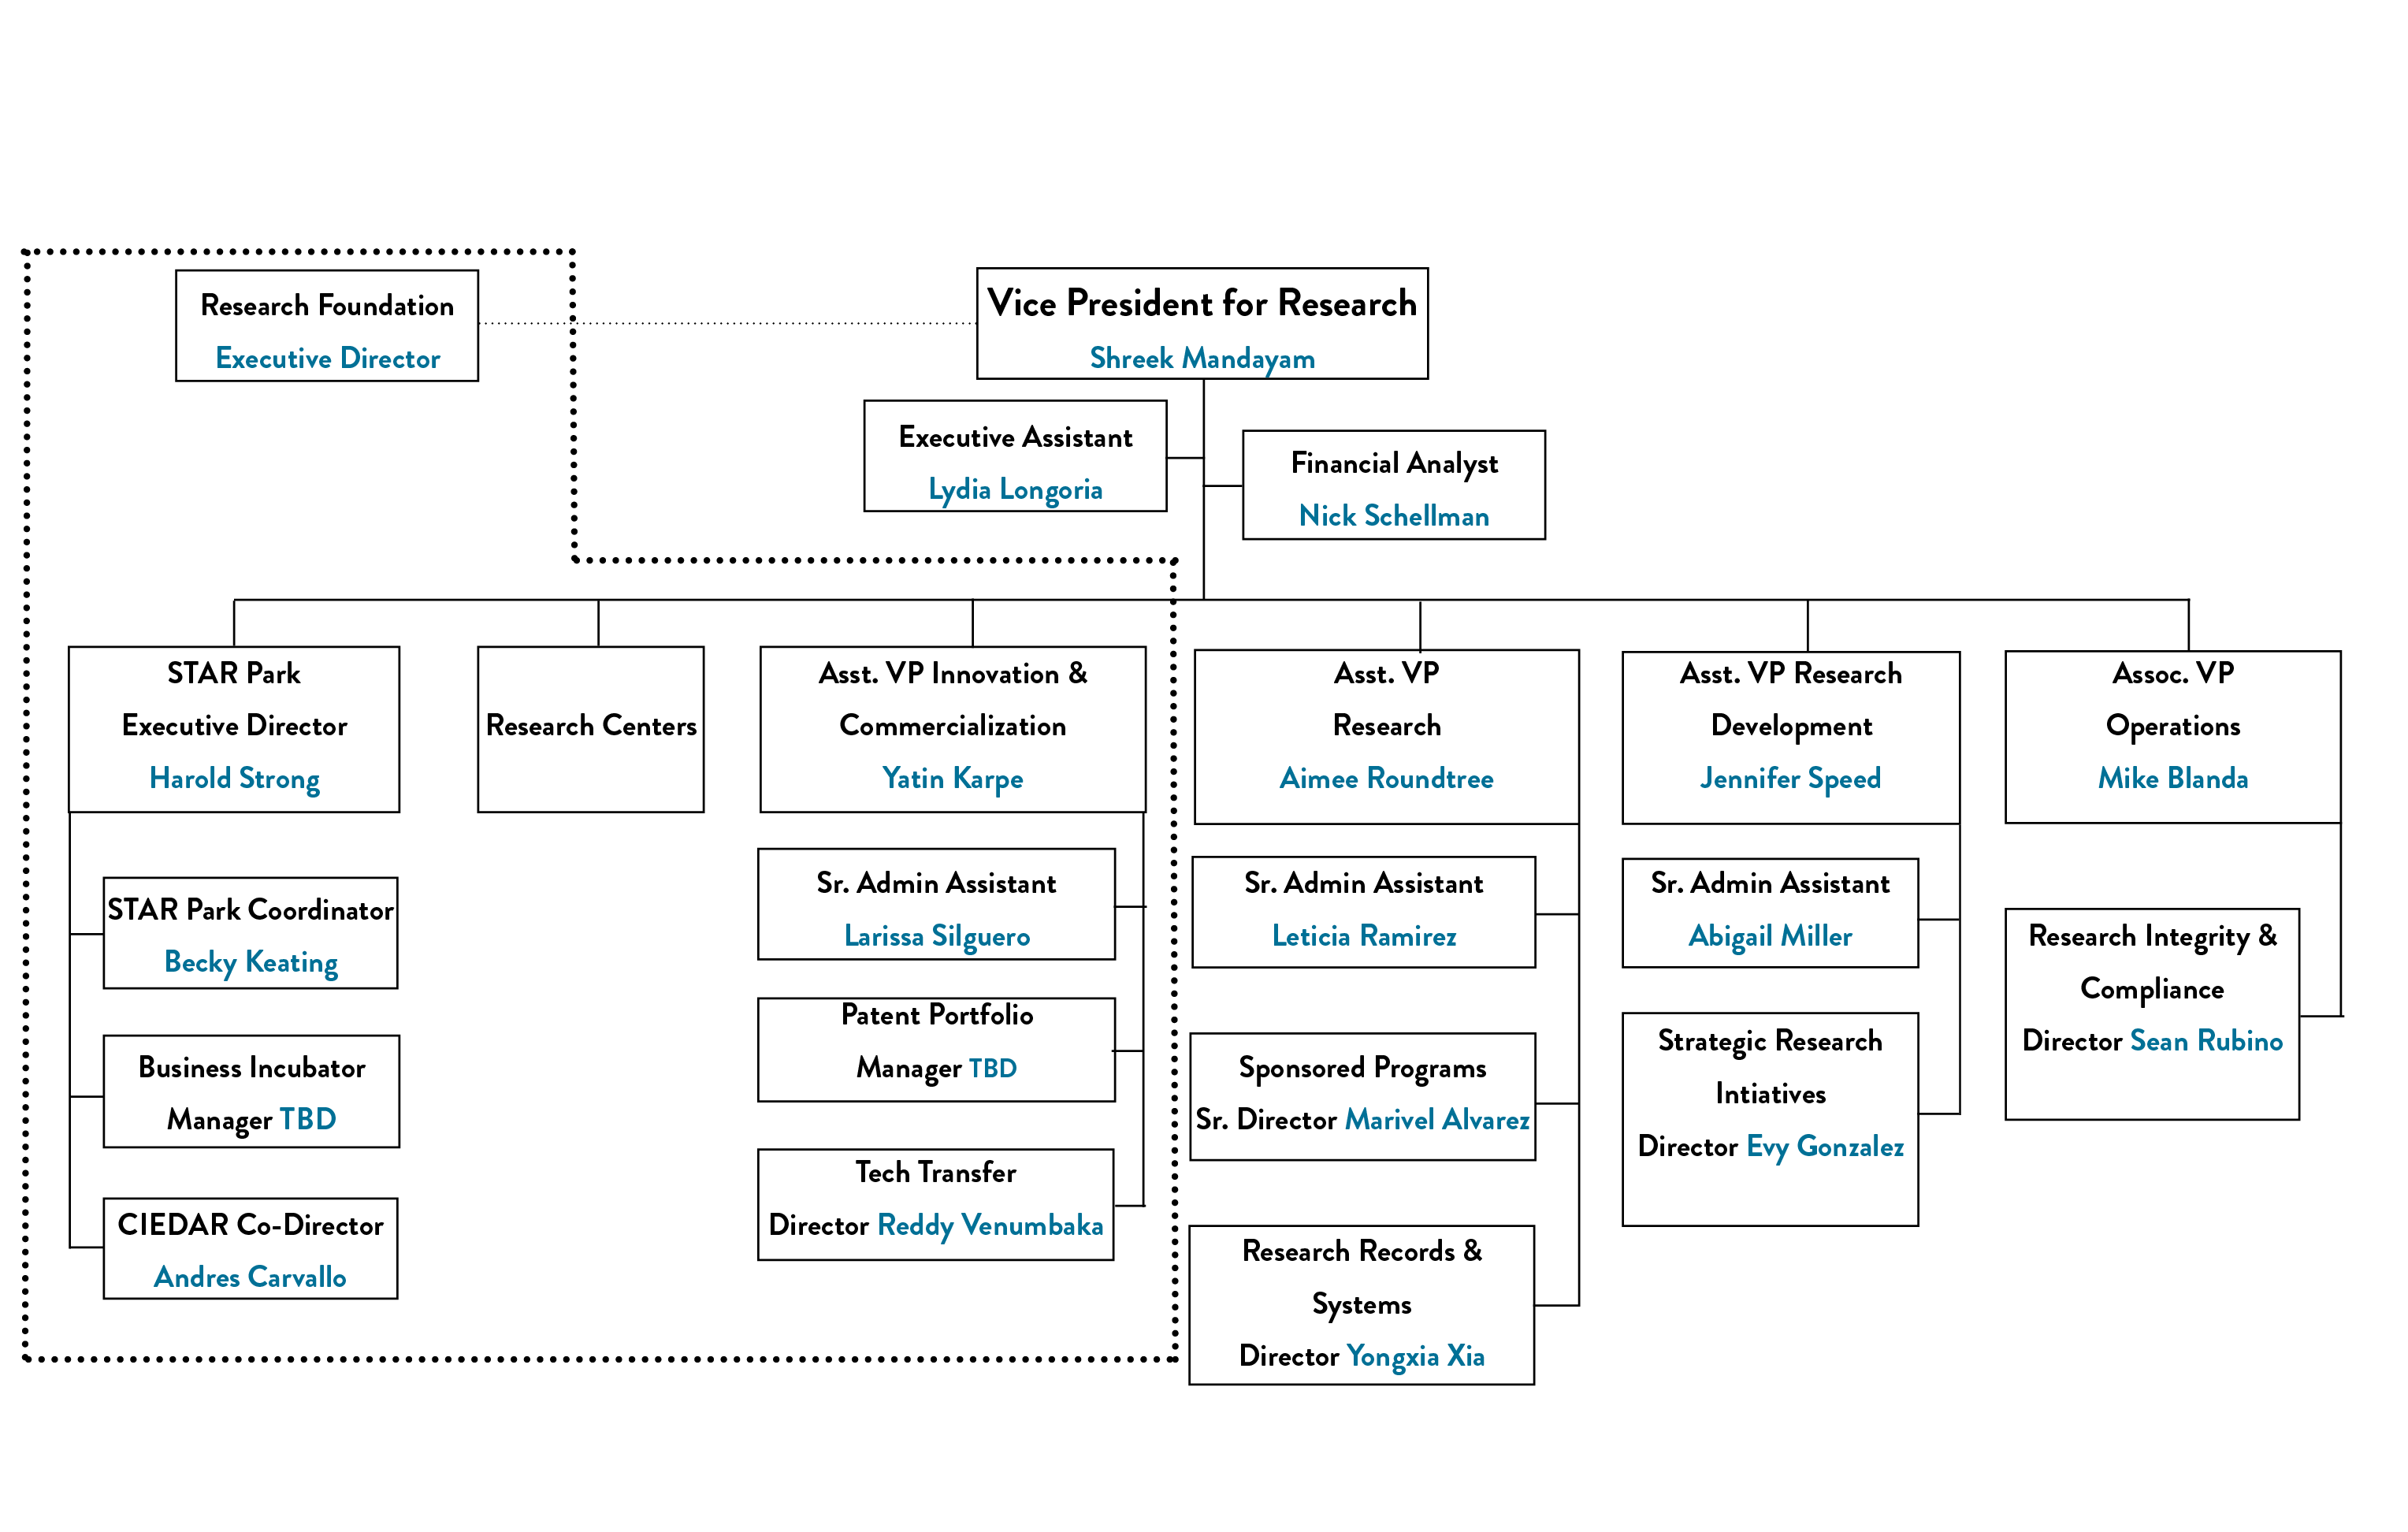 org chart of Division of Research